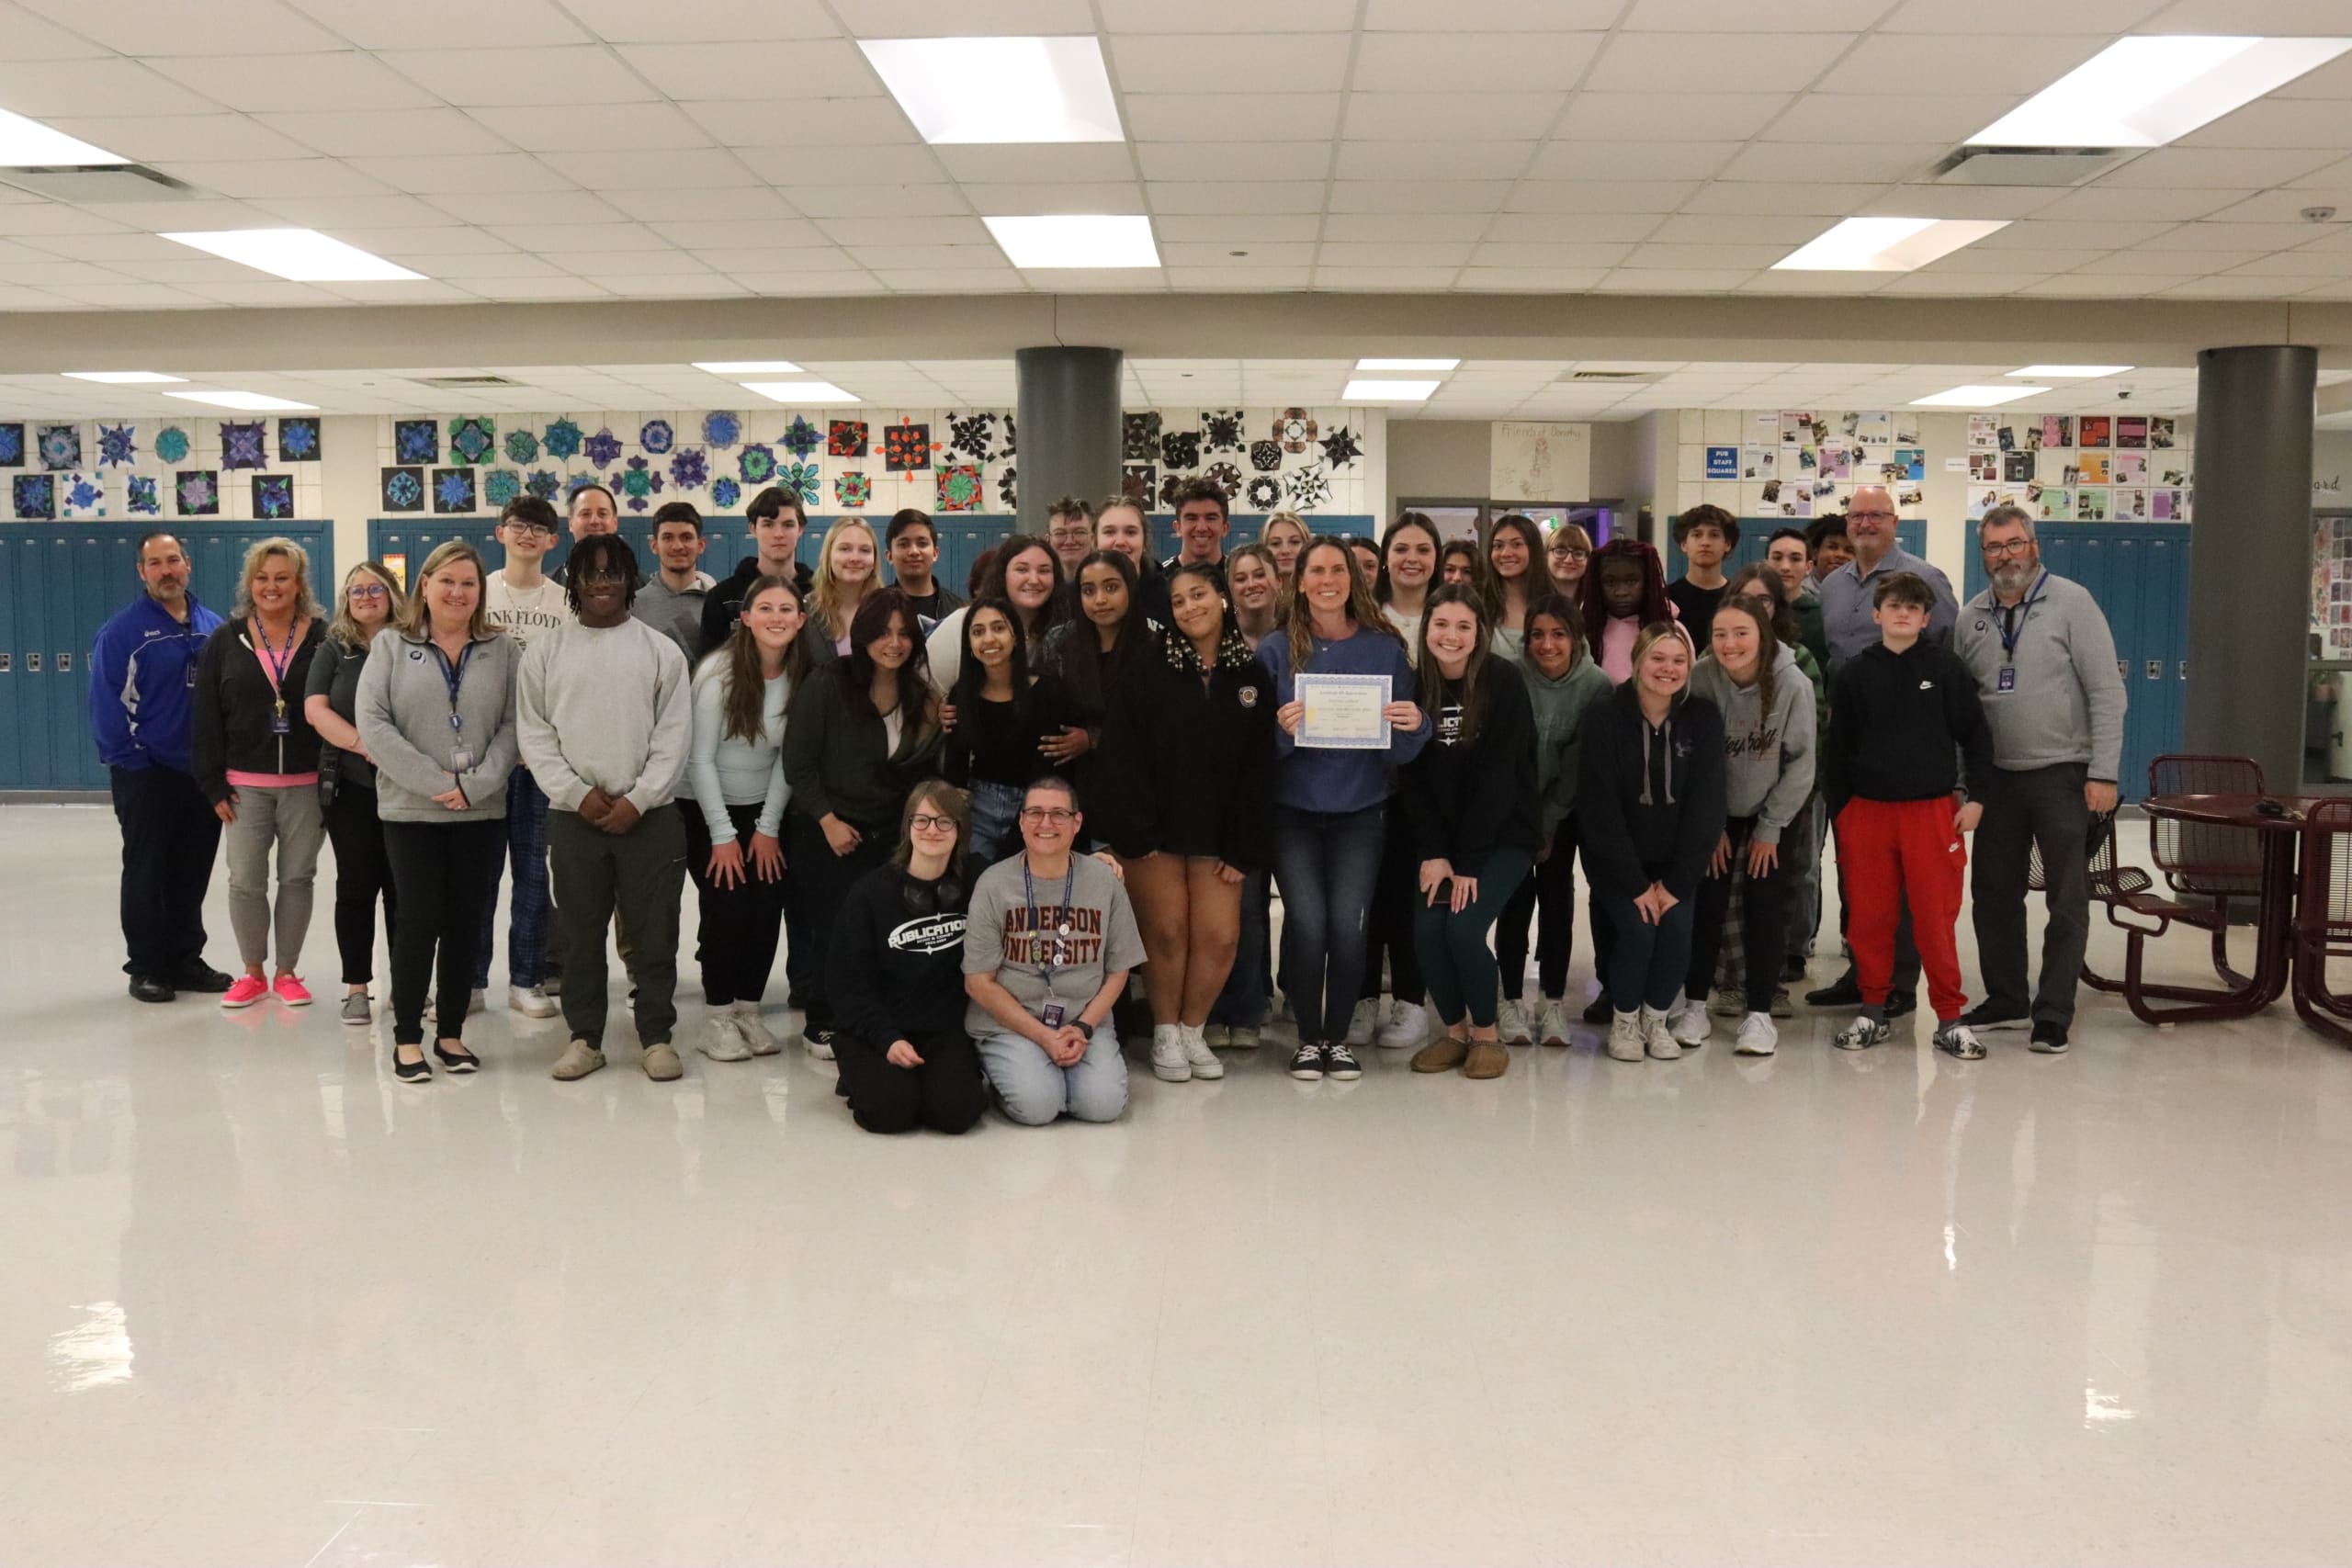 Mrs. Collard, LCHS teacher proudly poses for a picture along with administration and publications students after being named Teacher of the Year.